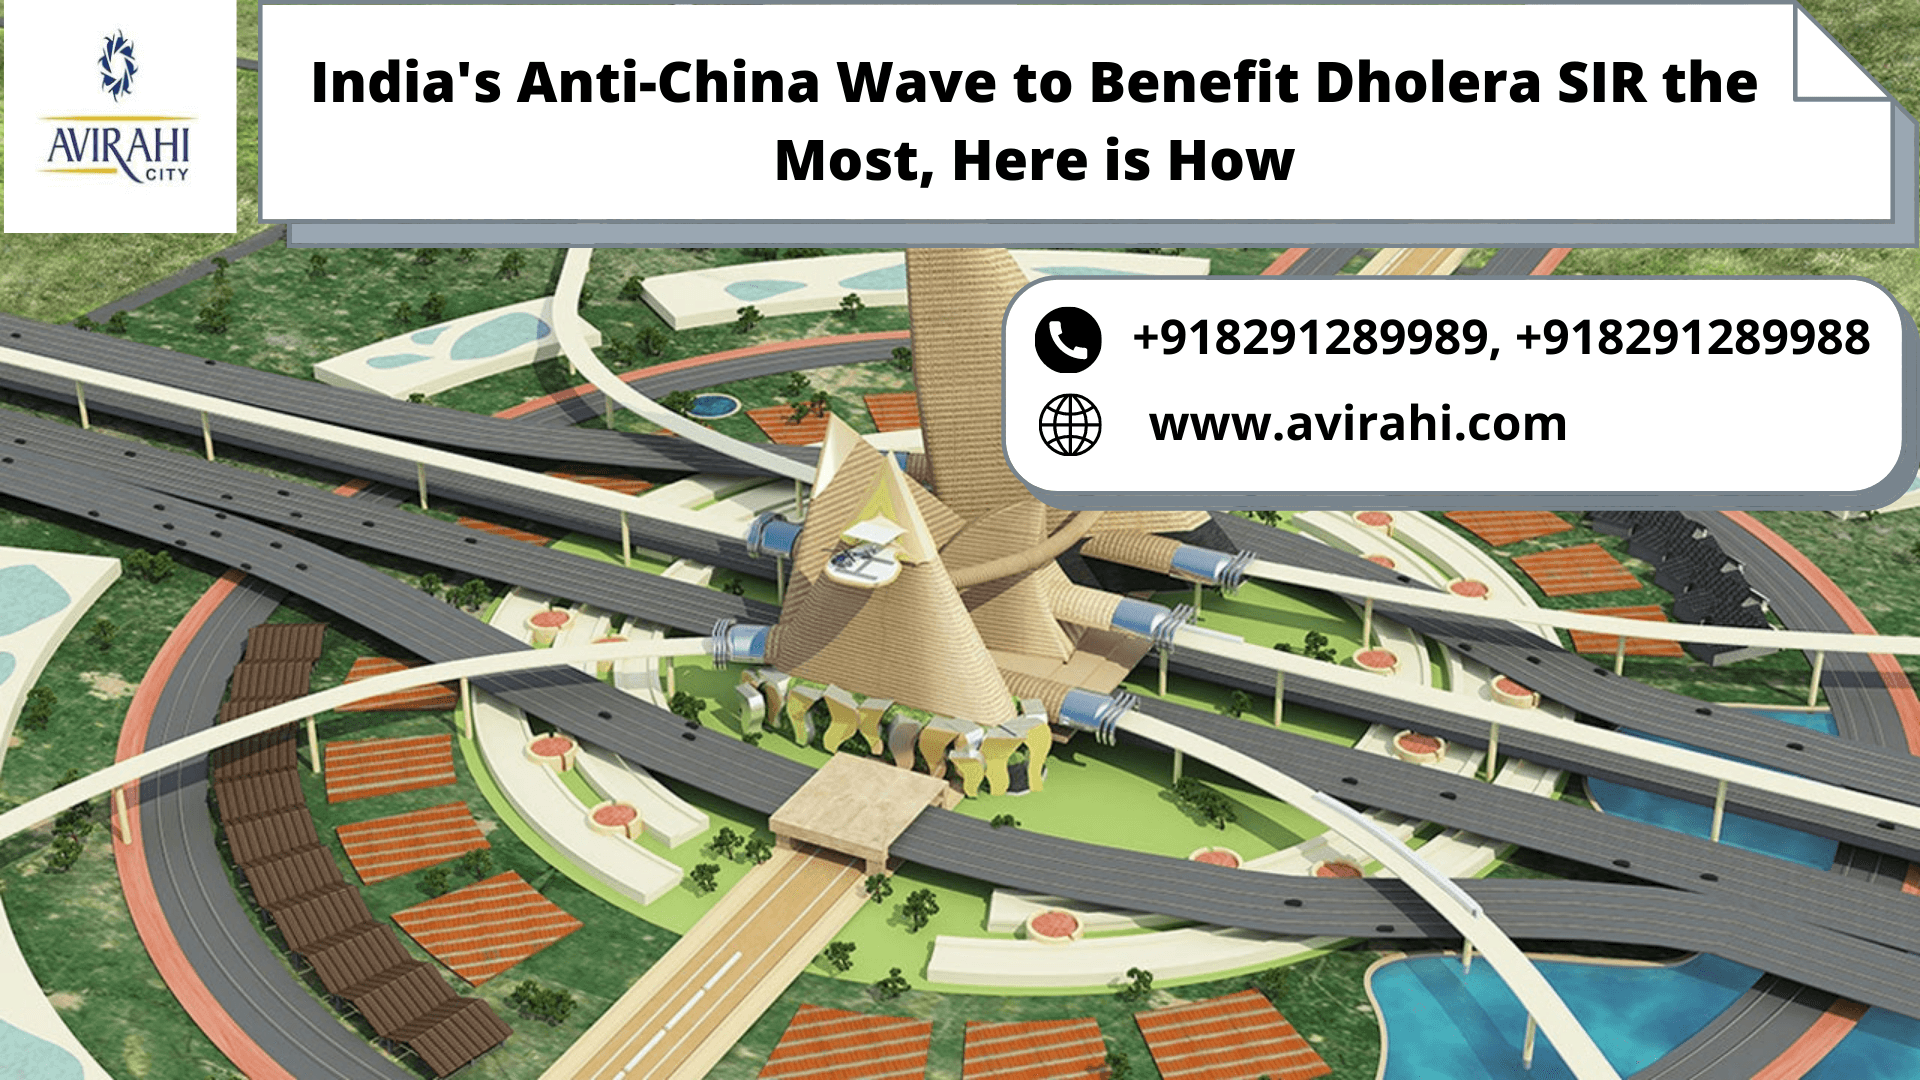 India's Anti-China Wave to Benefit Dholera SIR the Most, Here is How